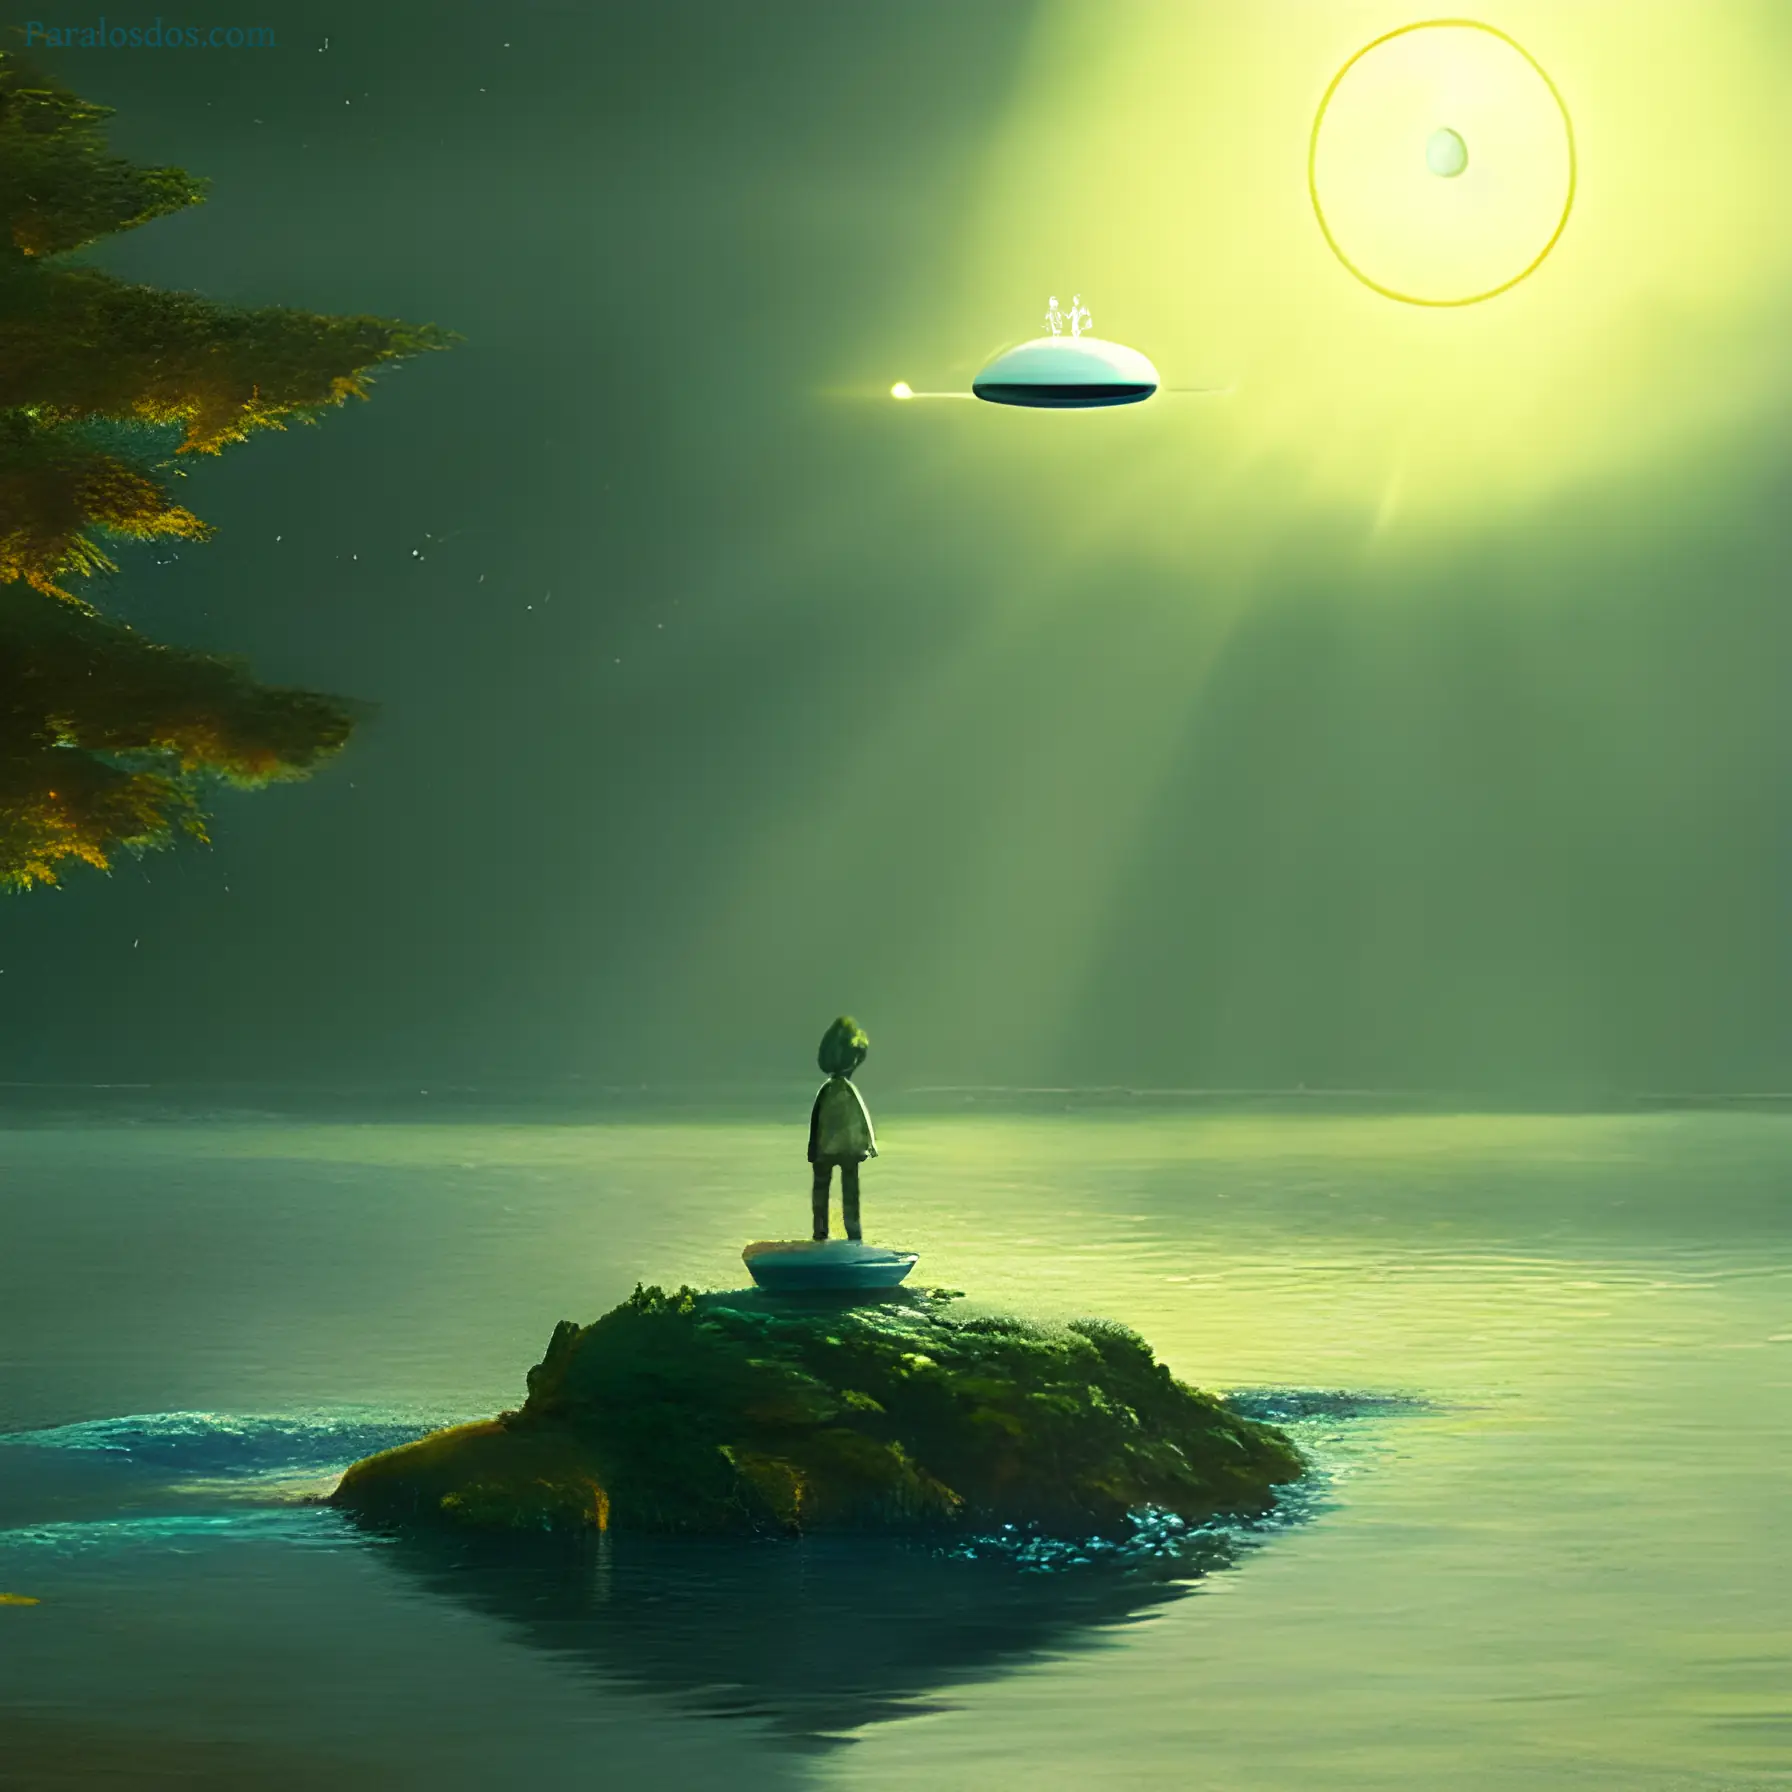 An artistic rendering of a figure standing on a very small, bare, island. There looks to be some sort of alien craft in the sky.